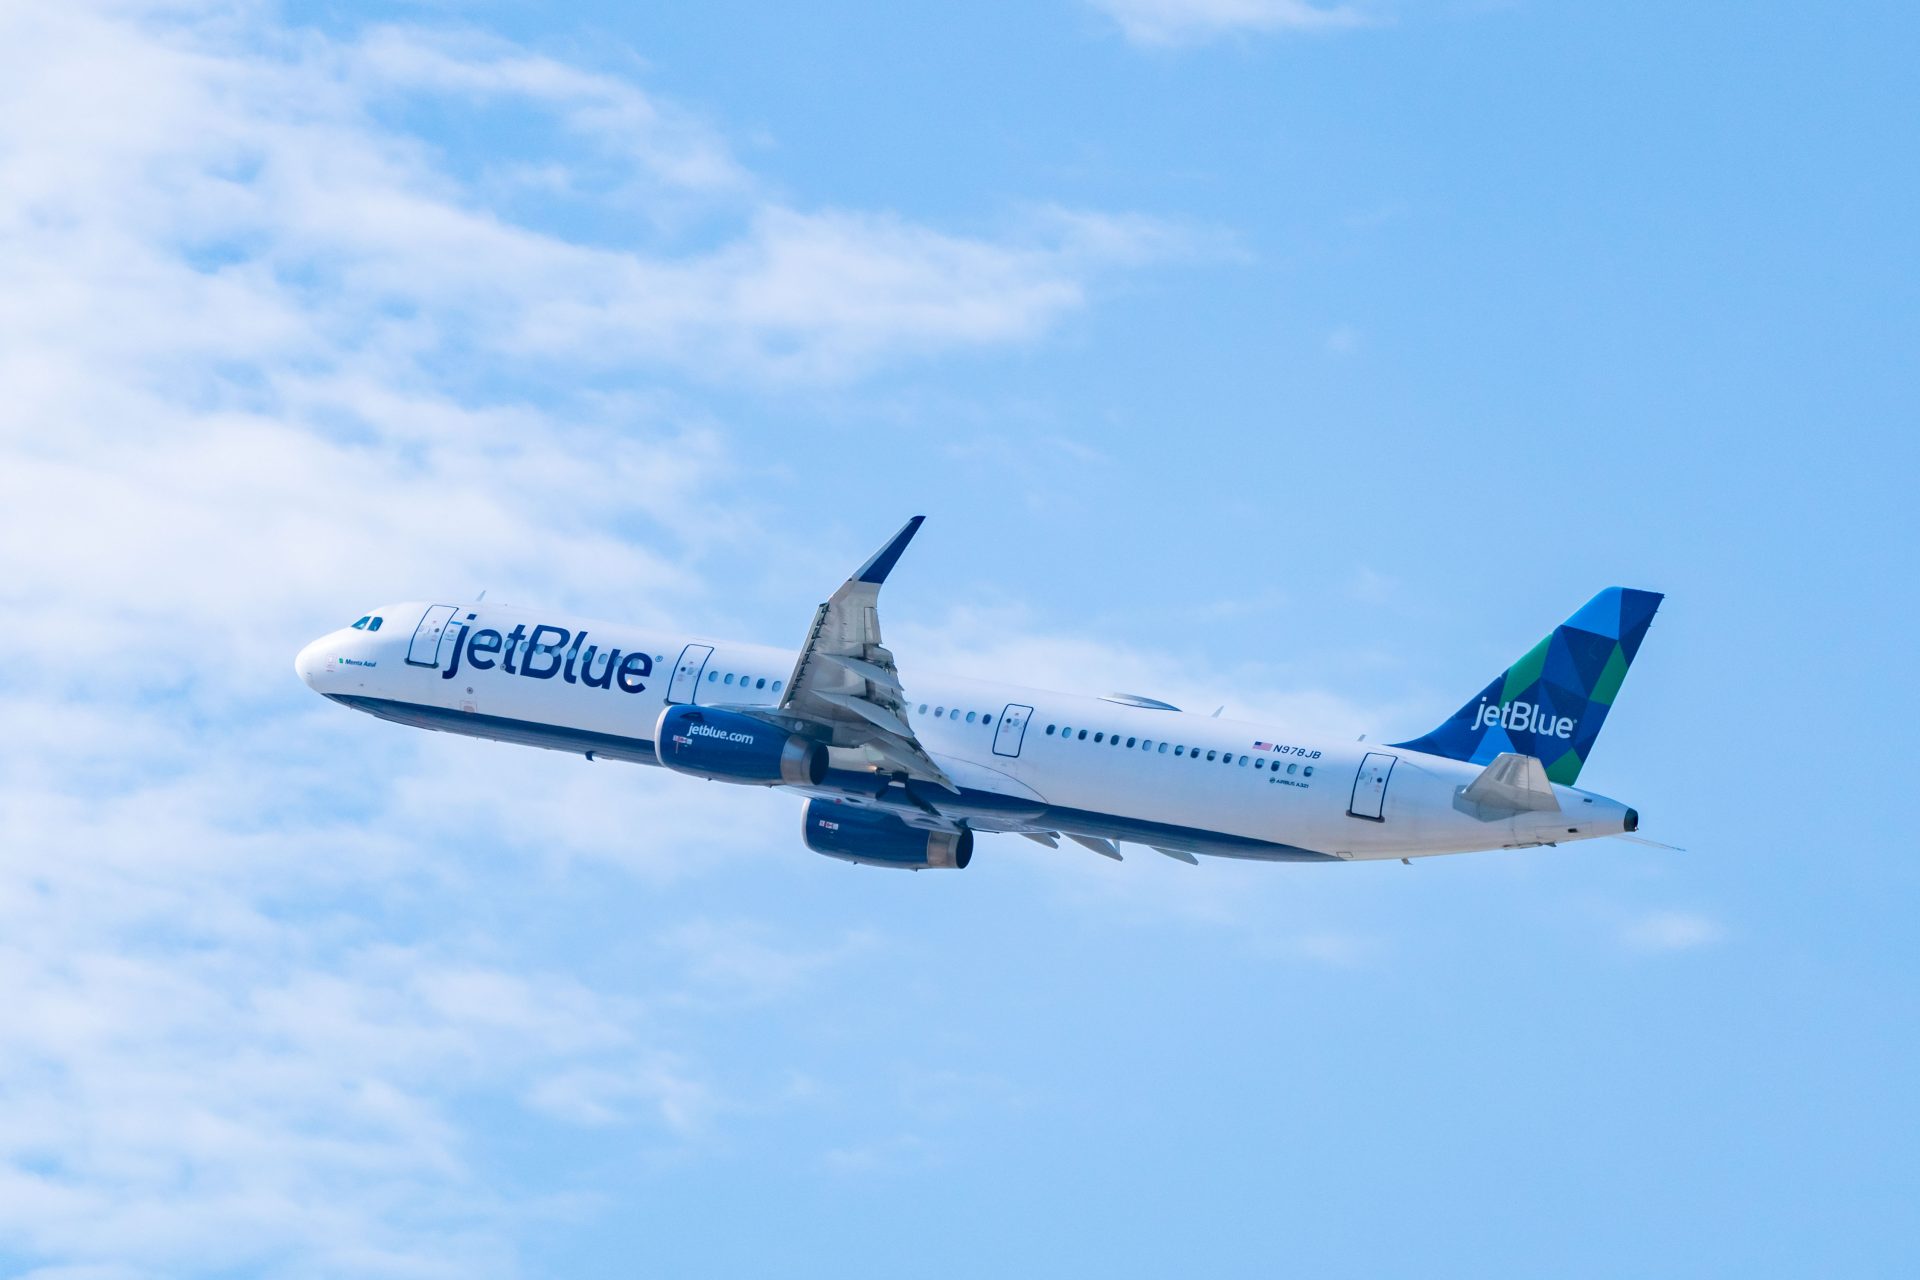 <p><span>Despite being ranked the best airline for comfort and in-flight experience,  JetBlue was ranked near the bottom of the list because they’re apparently really bad for mishandling luggage and canceling flights. The airline only got a final score of 55.46. </span></p>